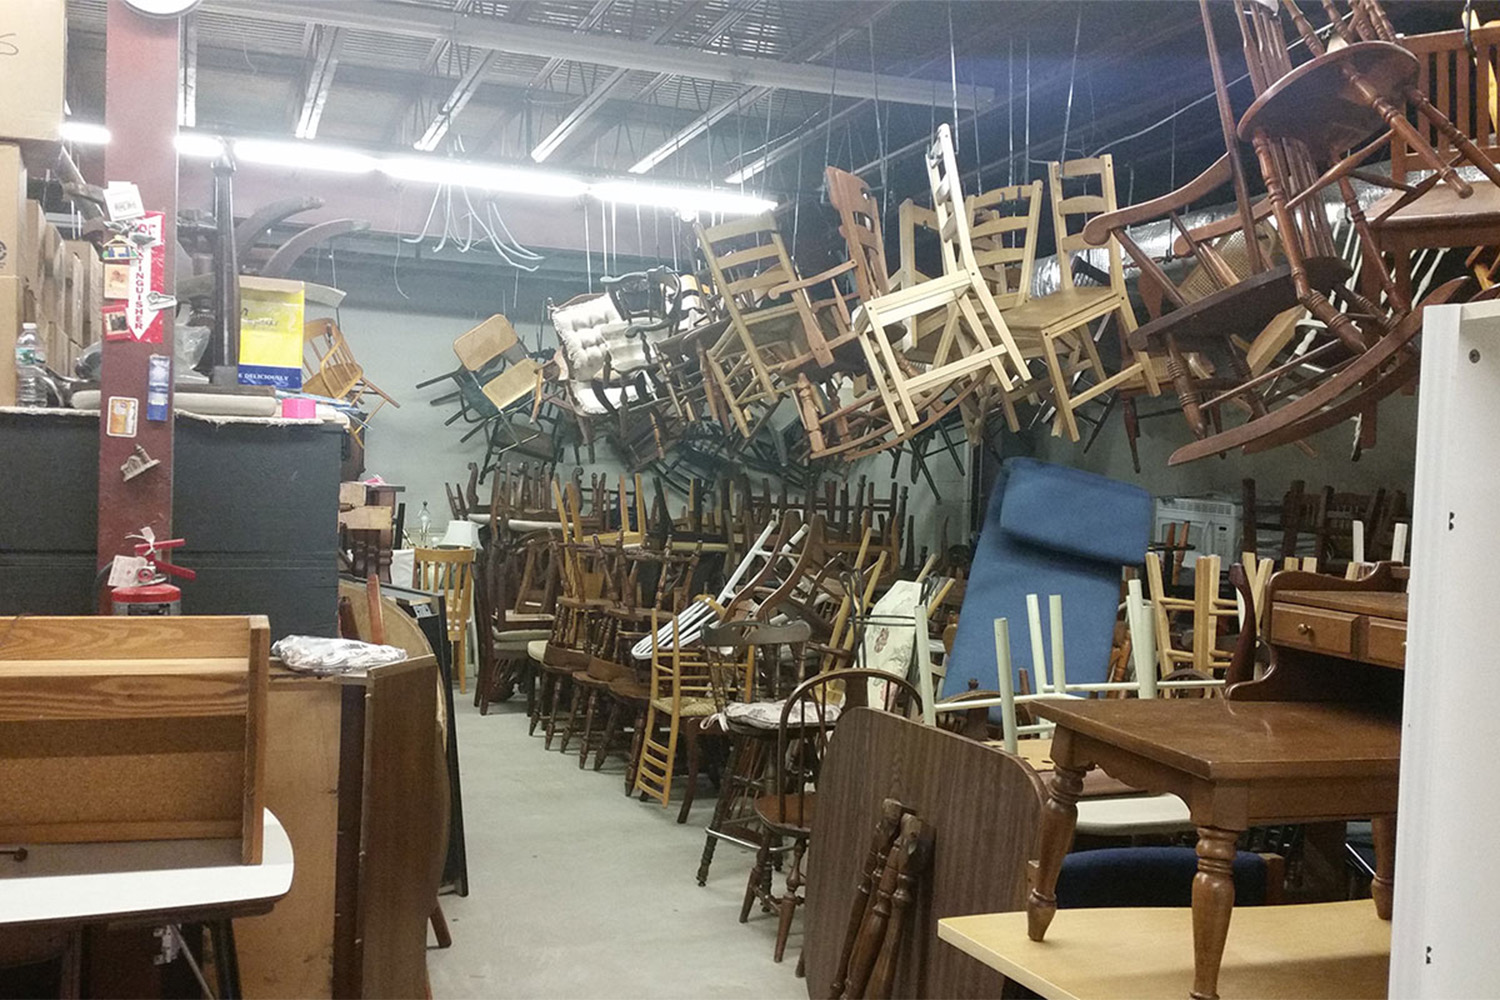 Inside the MOD warehouse: lots of wooden chairs hanging from the ceiling 